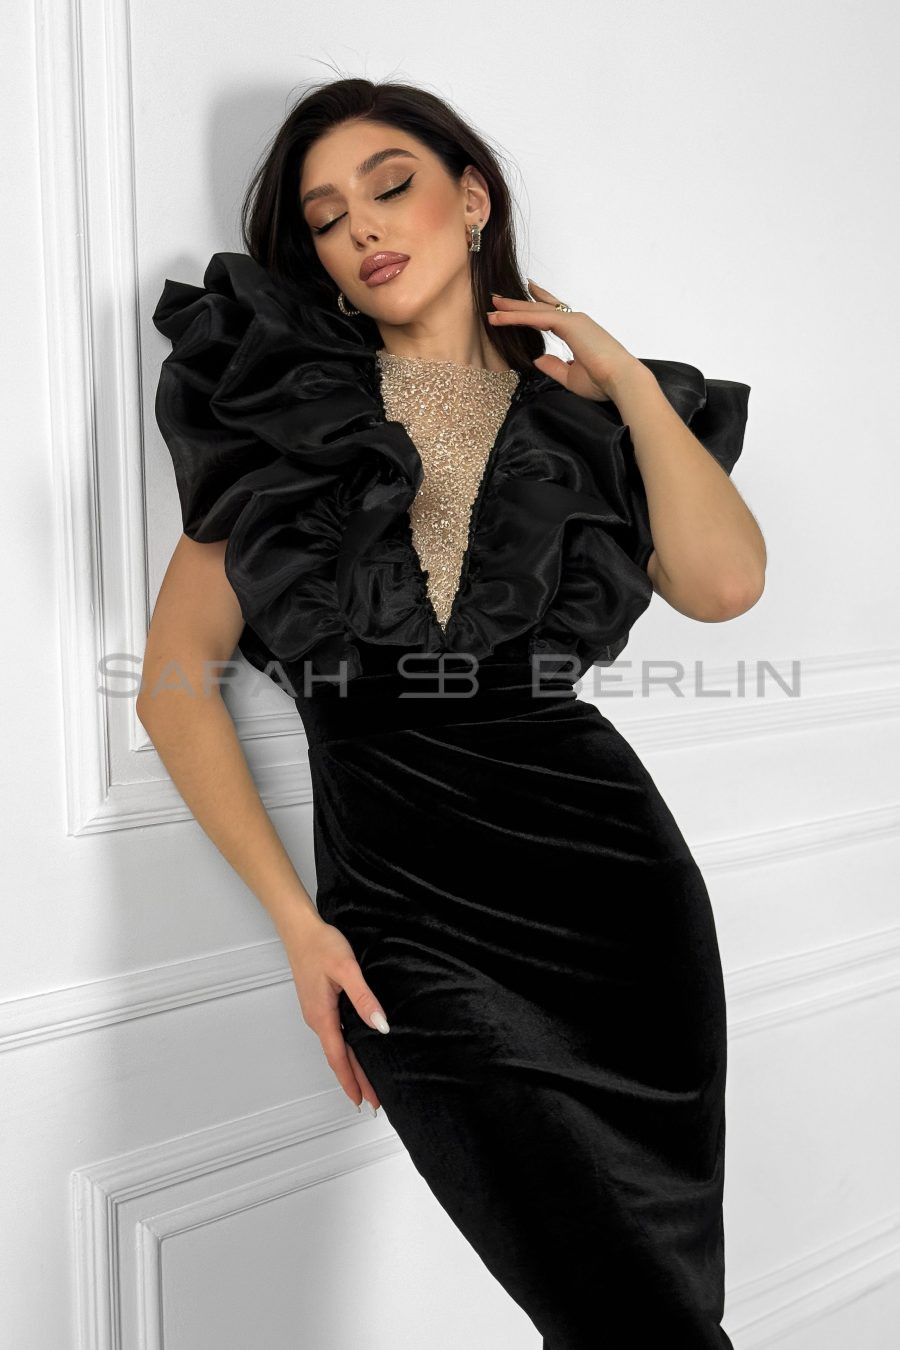 Velvet dress with organza wings, decorated with pearls